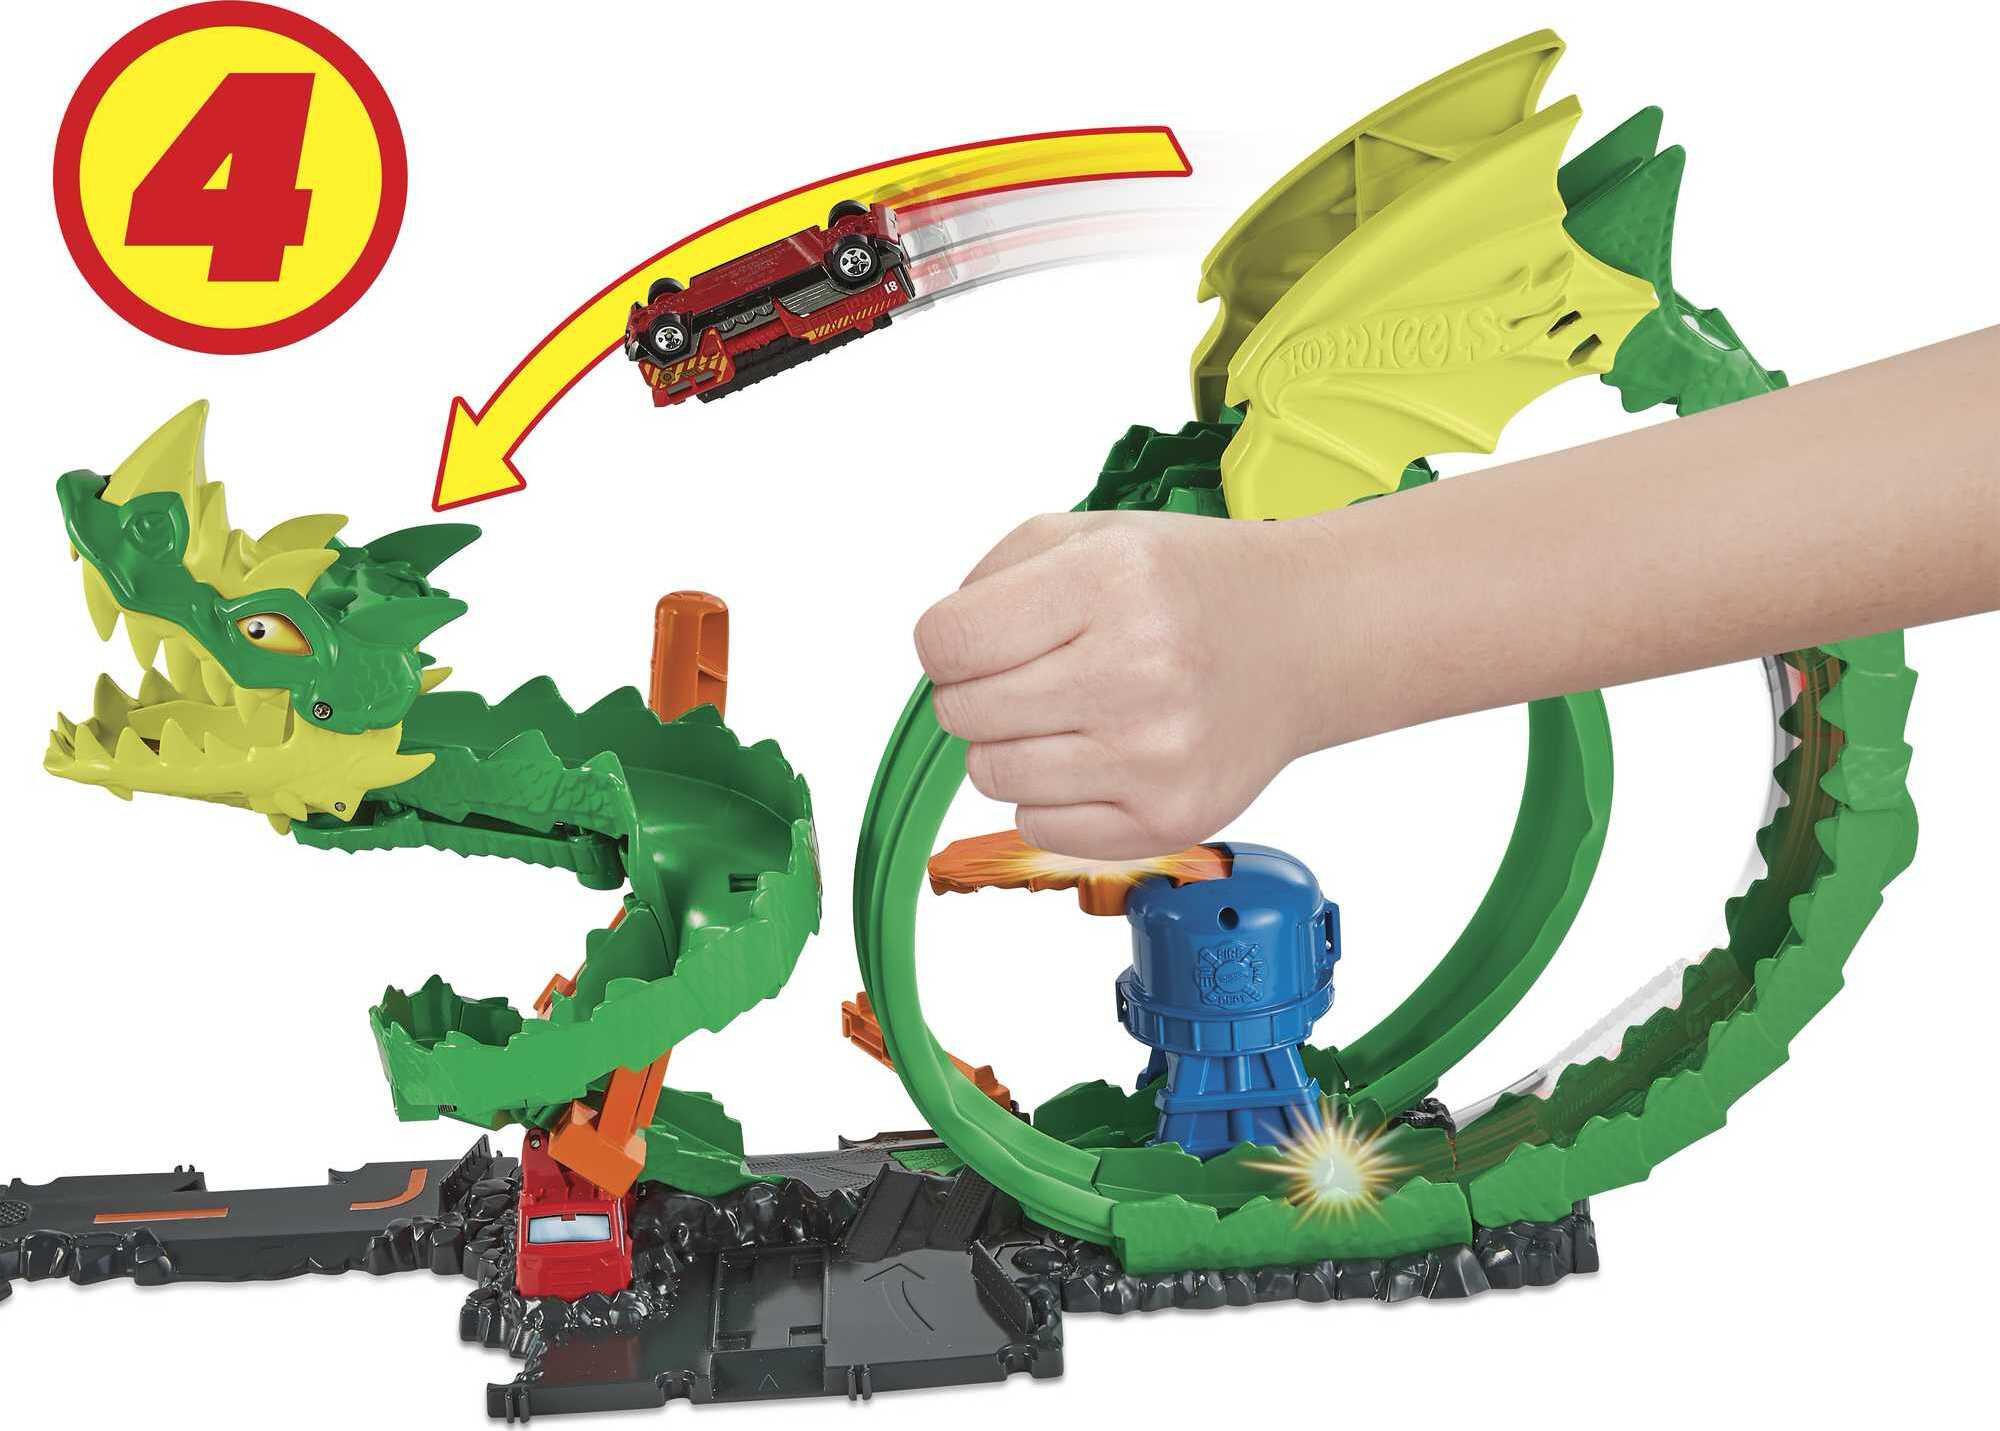 Hot Wheels City Dragon Drive Firefight Track Set & 1:64 Scale Toy Firetruck, Fire Station Theme - image 1 of 7